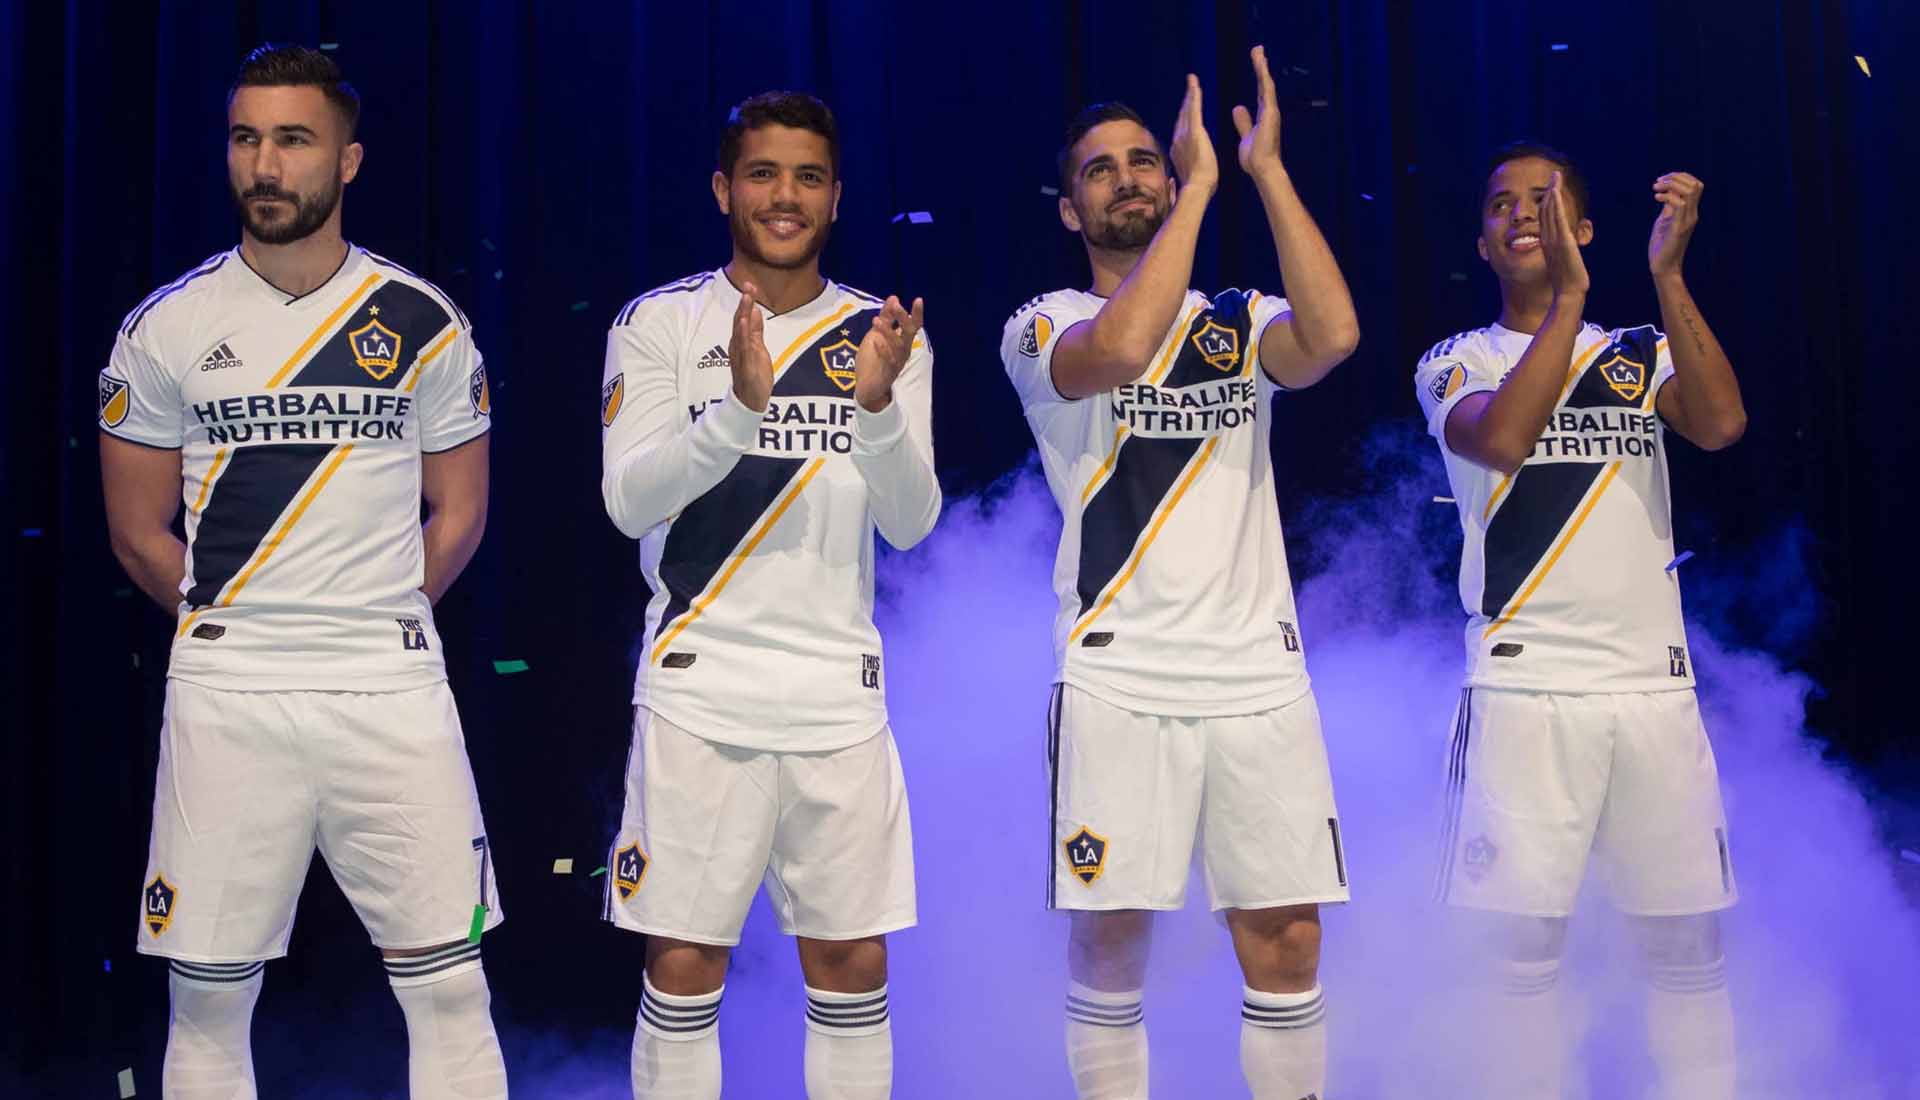 Los Angeles Galaxy unveiled 2018 home kit and Since 96 lookbook